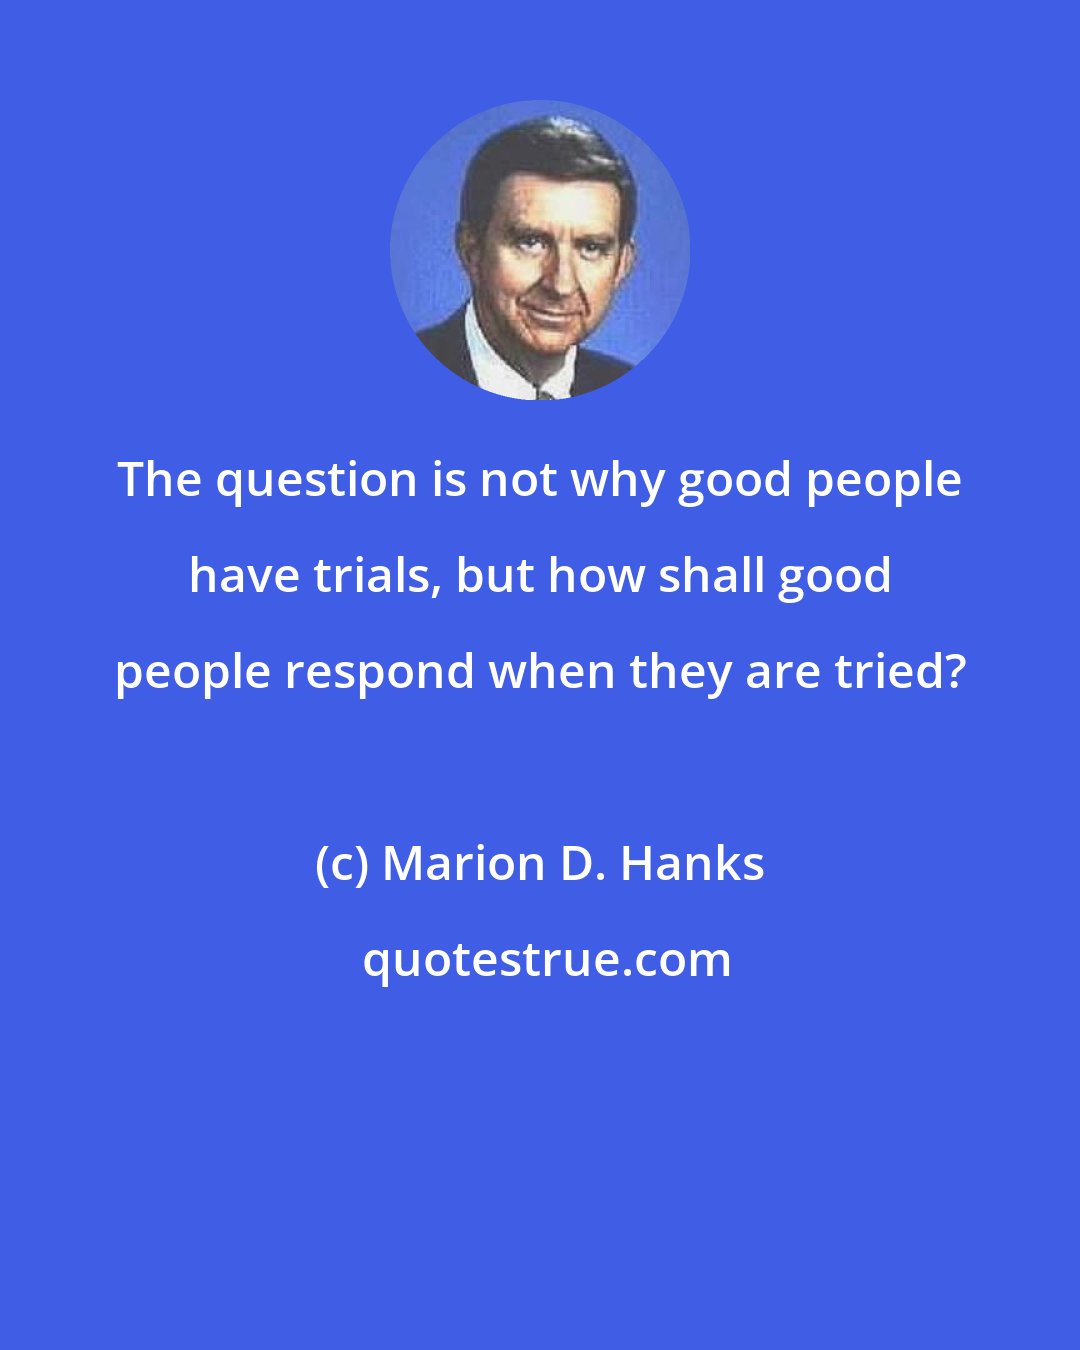 Marion D. Hanks: The question is not why good people have trials, but how shall good people respond when they are tried?